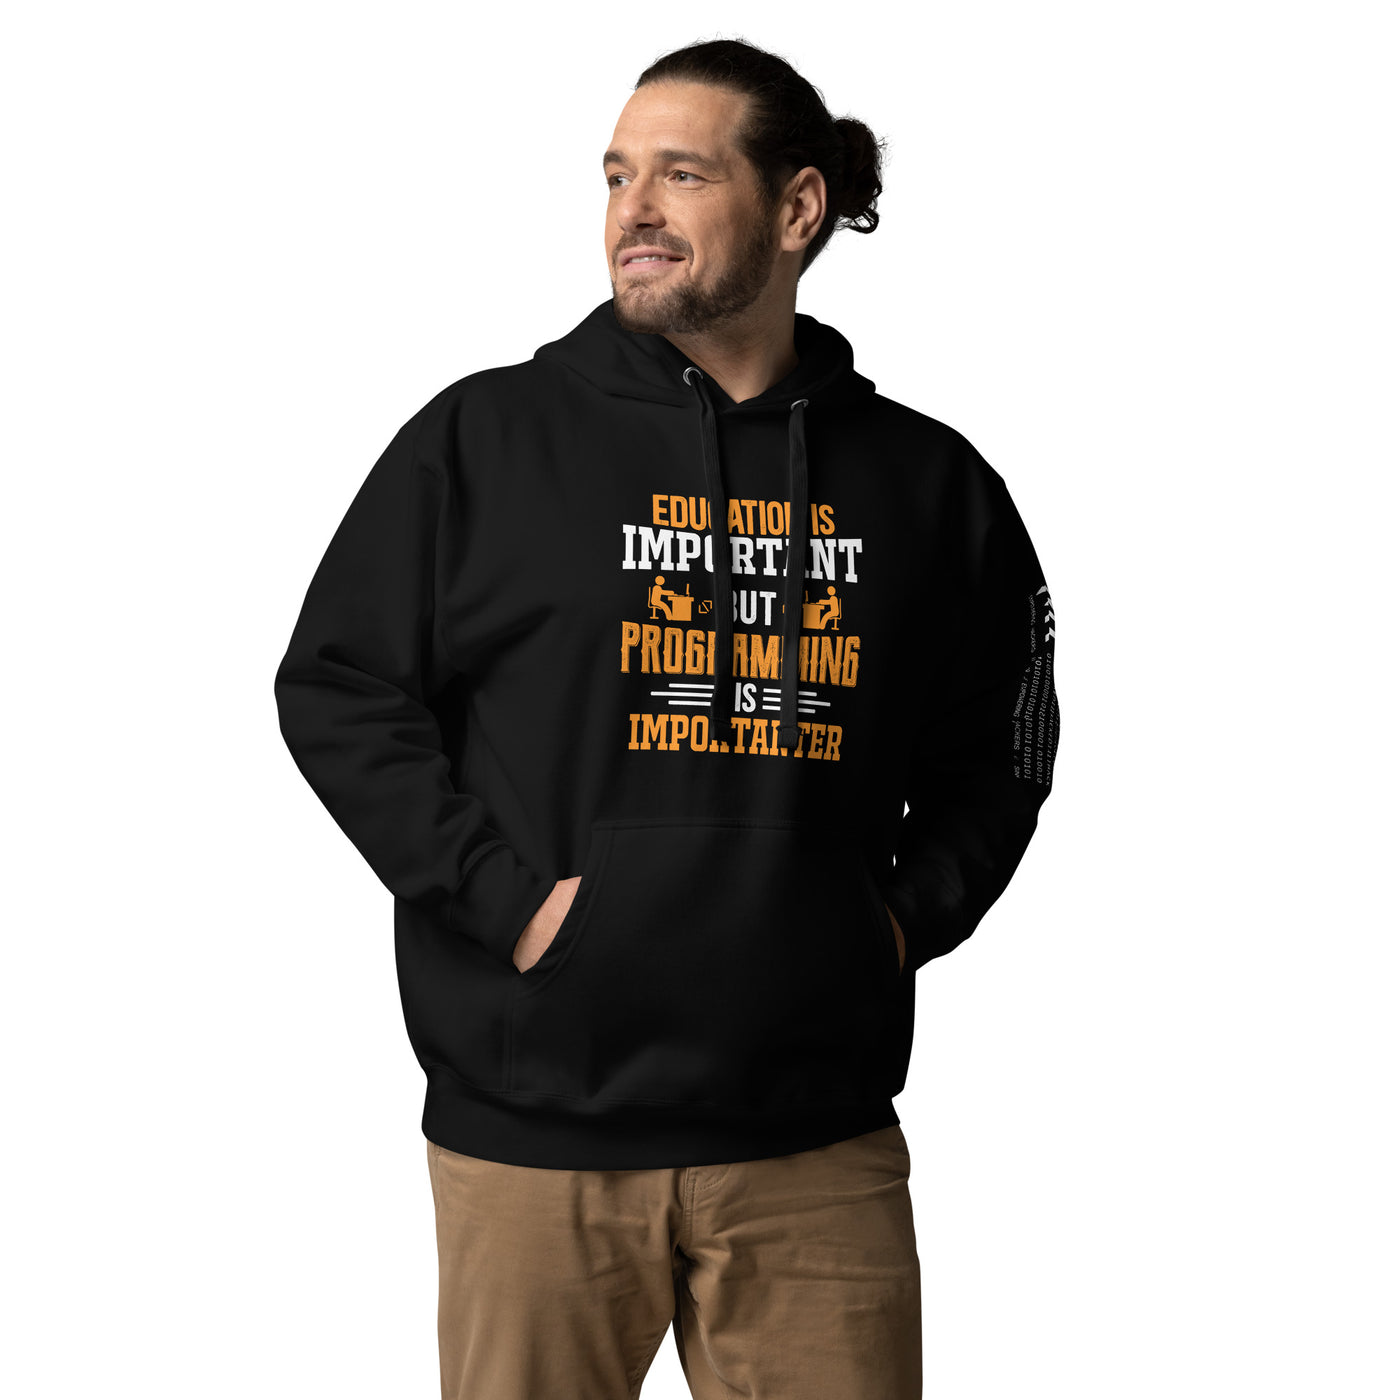 Education is important, but Programming is importanter - Unisex Hoodie